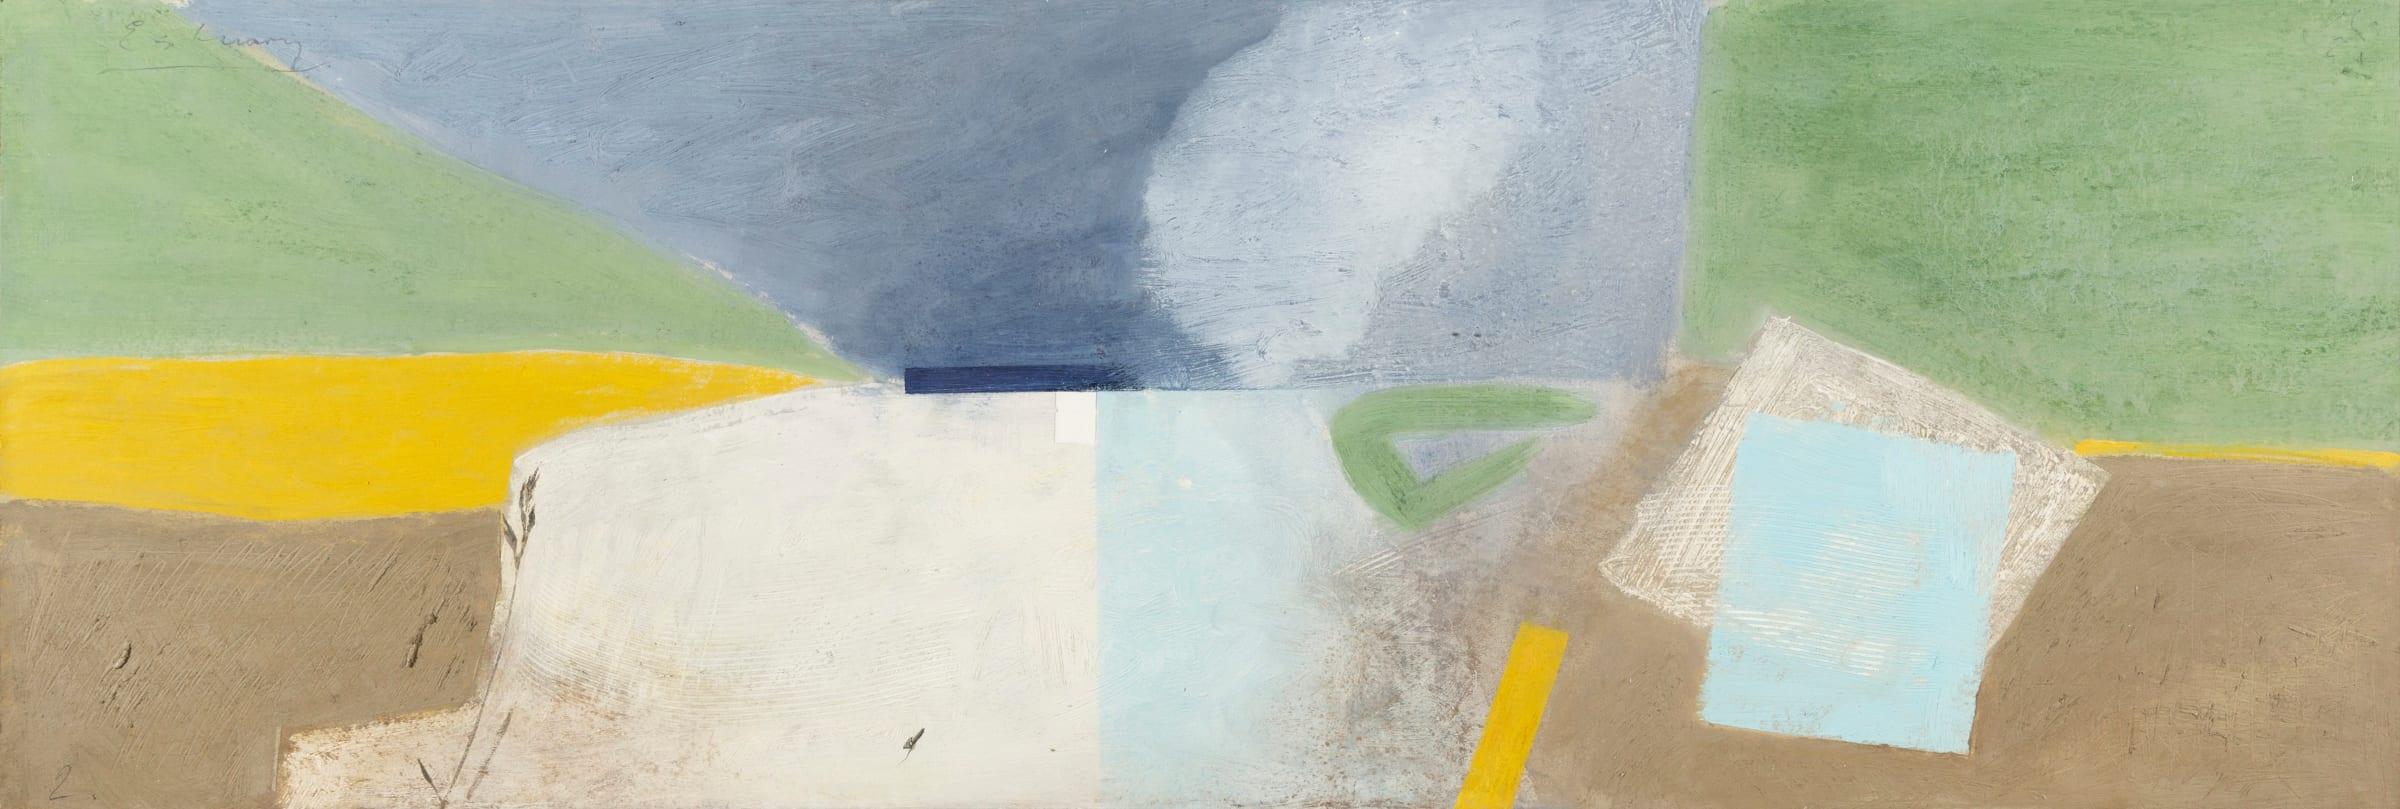 Estuary, Oil on Panel Painting by Keith Purser, 2021